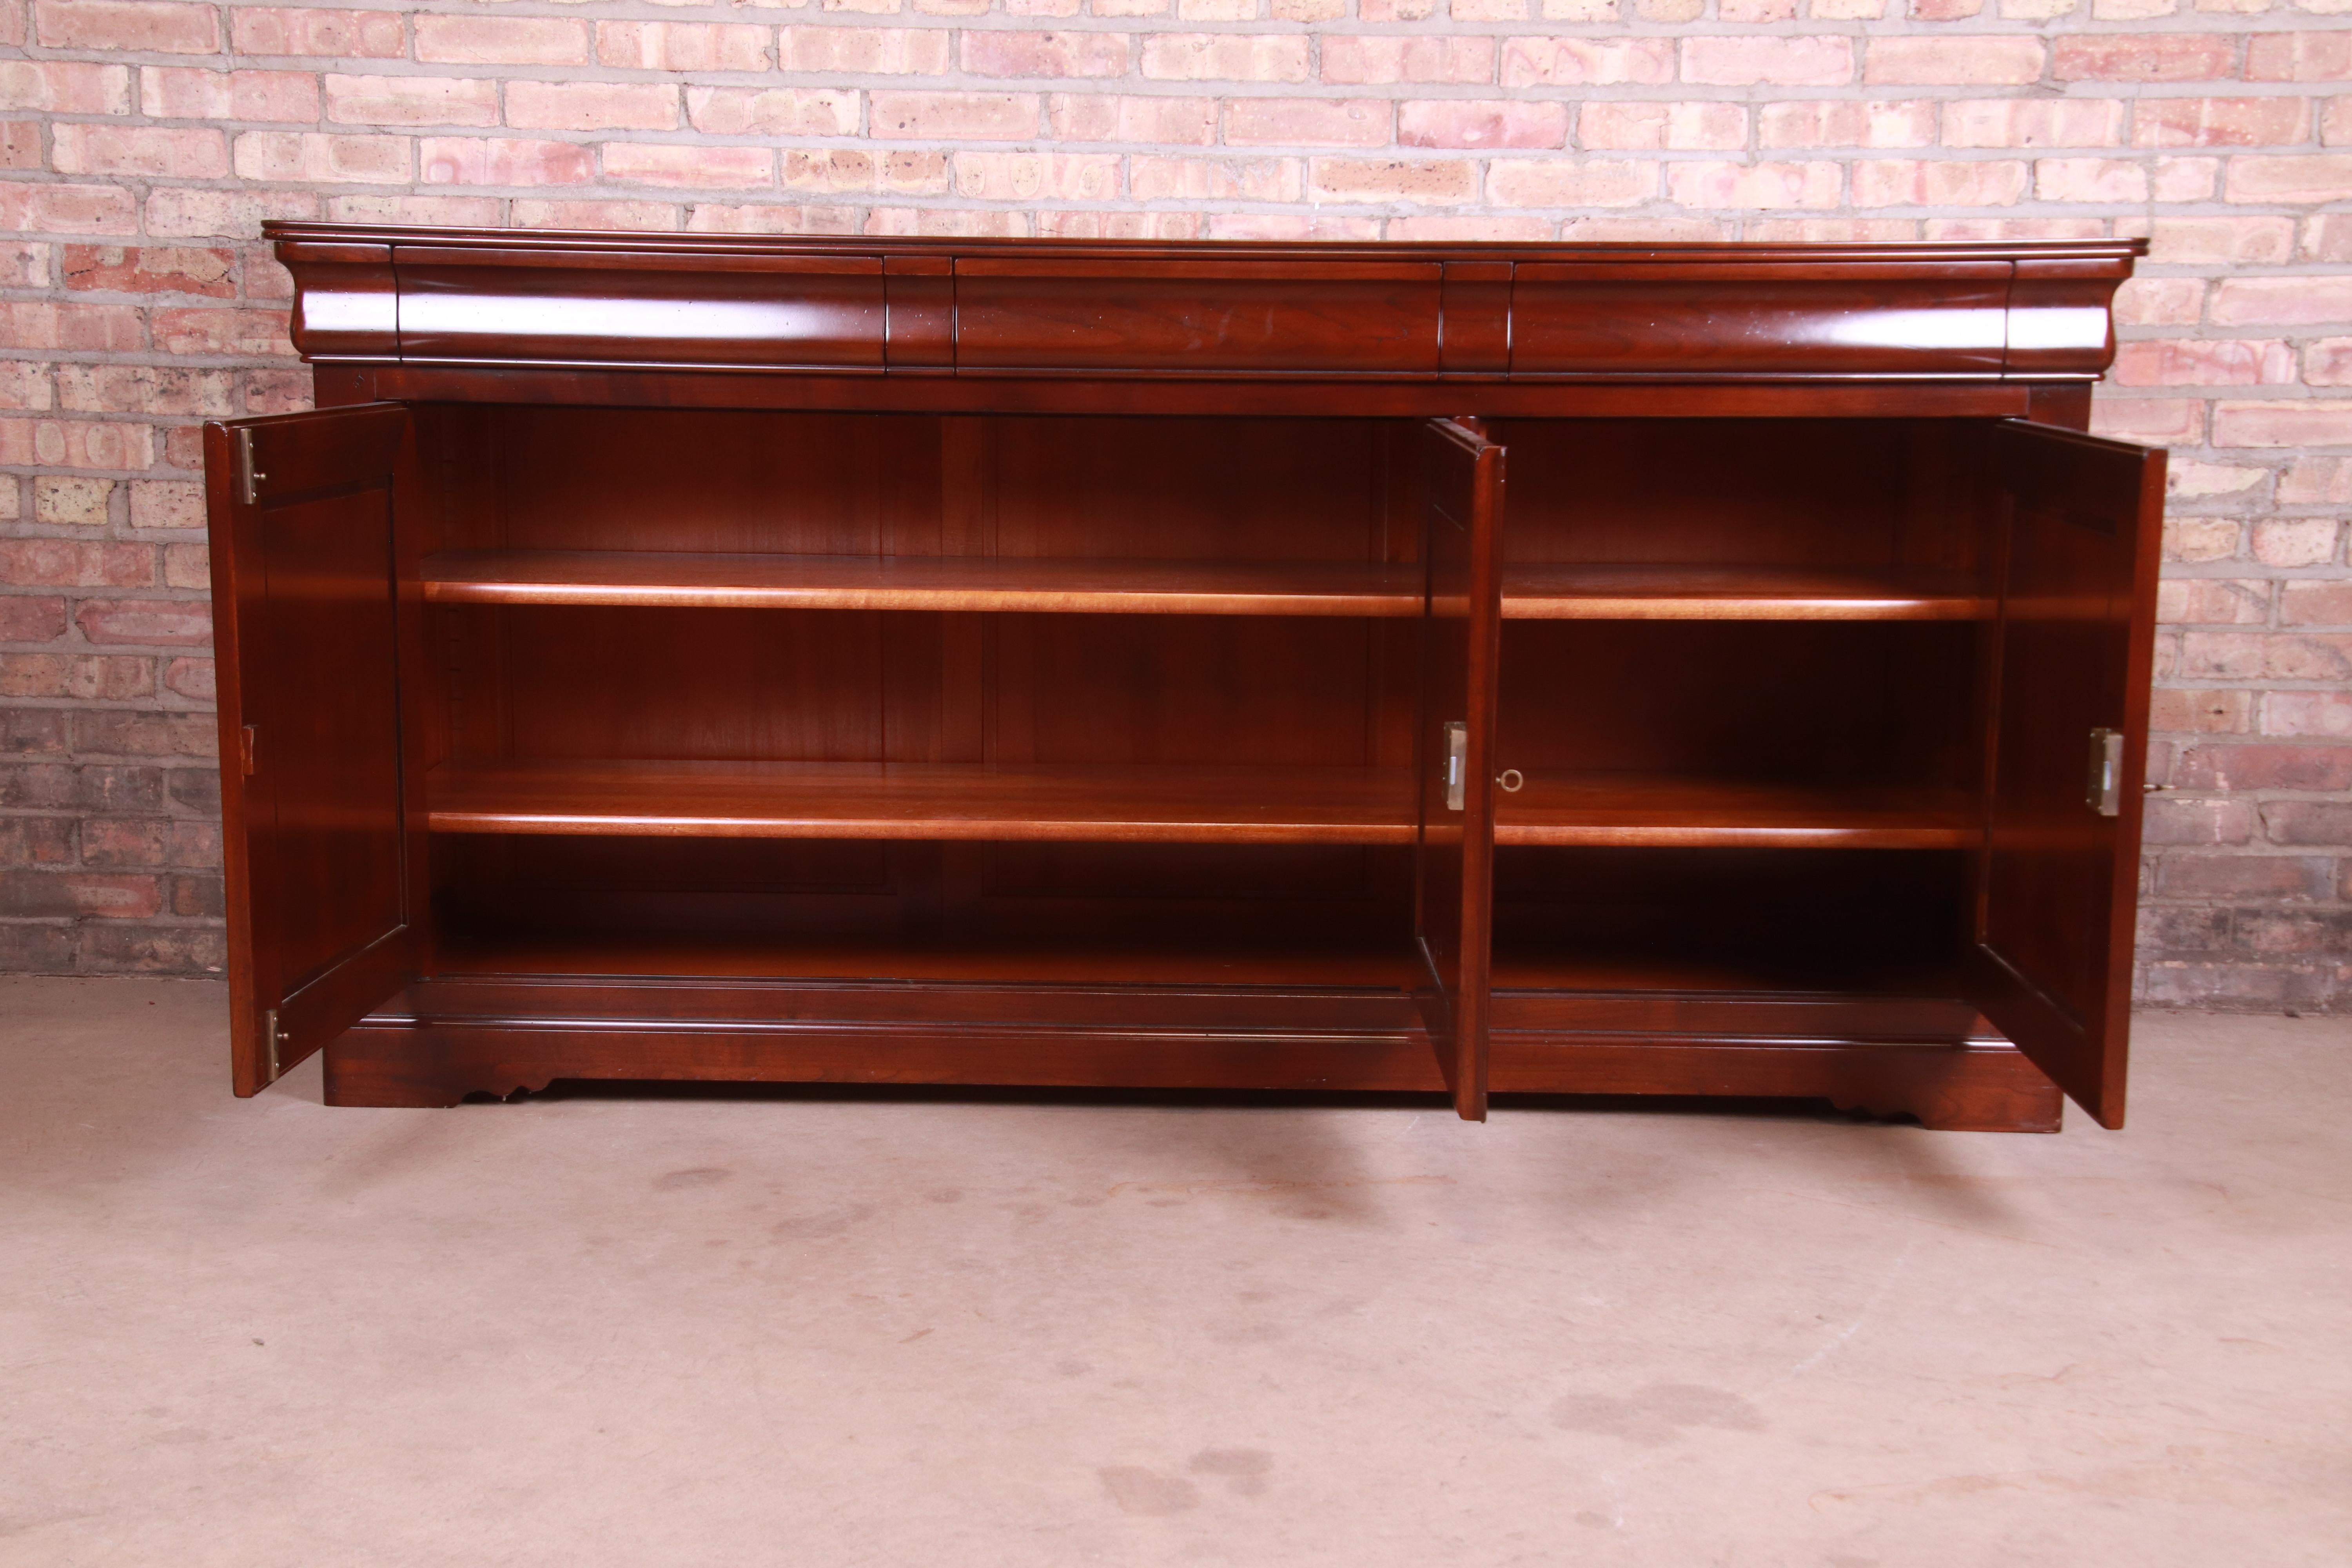 Grange French Provincial Cherry Wood Sideboard Credenza or Bar Cabinet 6